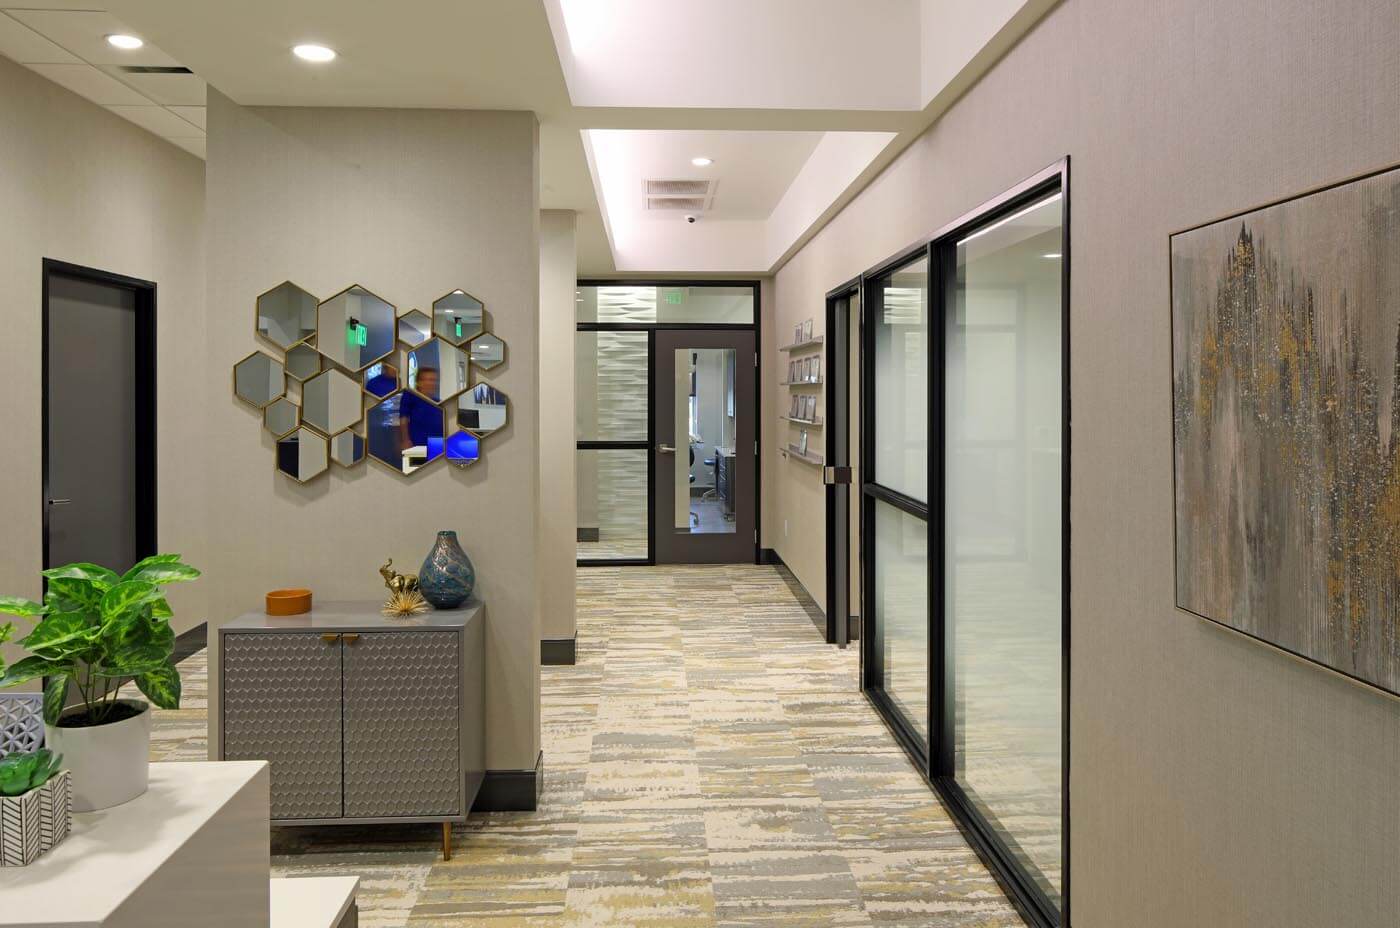 A view of the SkyRidge Dental lobby. Minimalist, soothing art hangs on the walls alongside potted plants and cozy furniture.